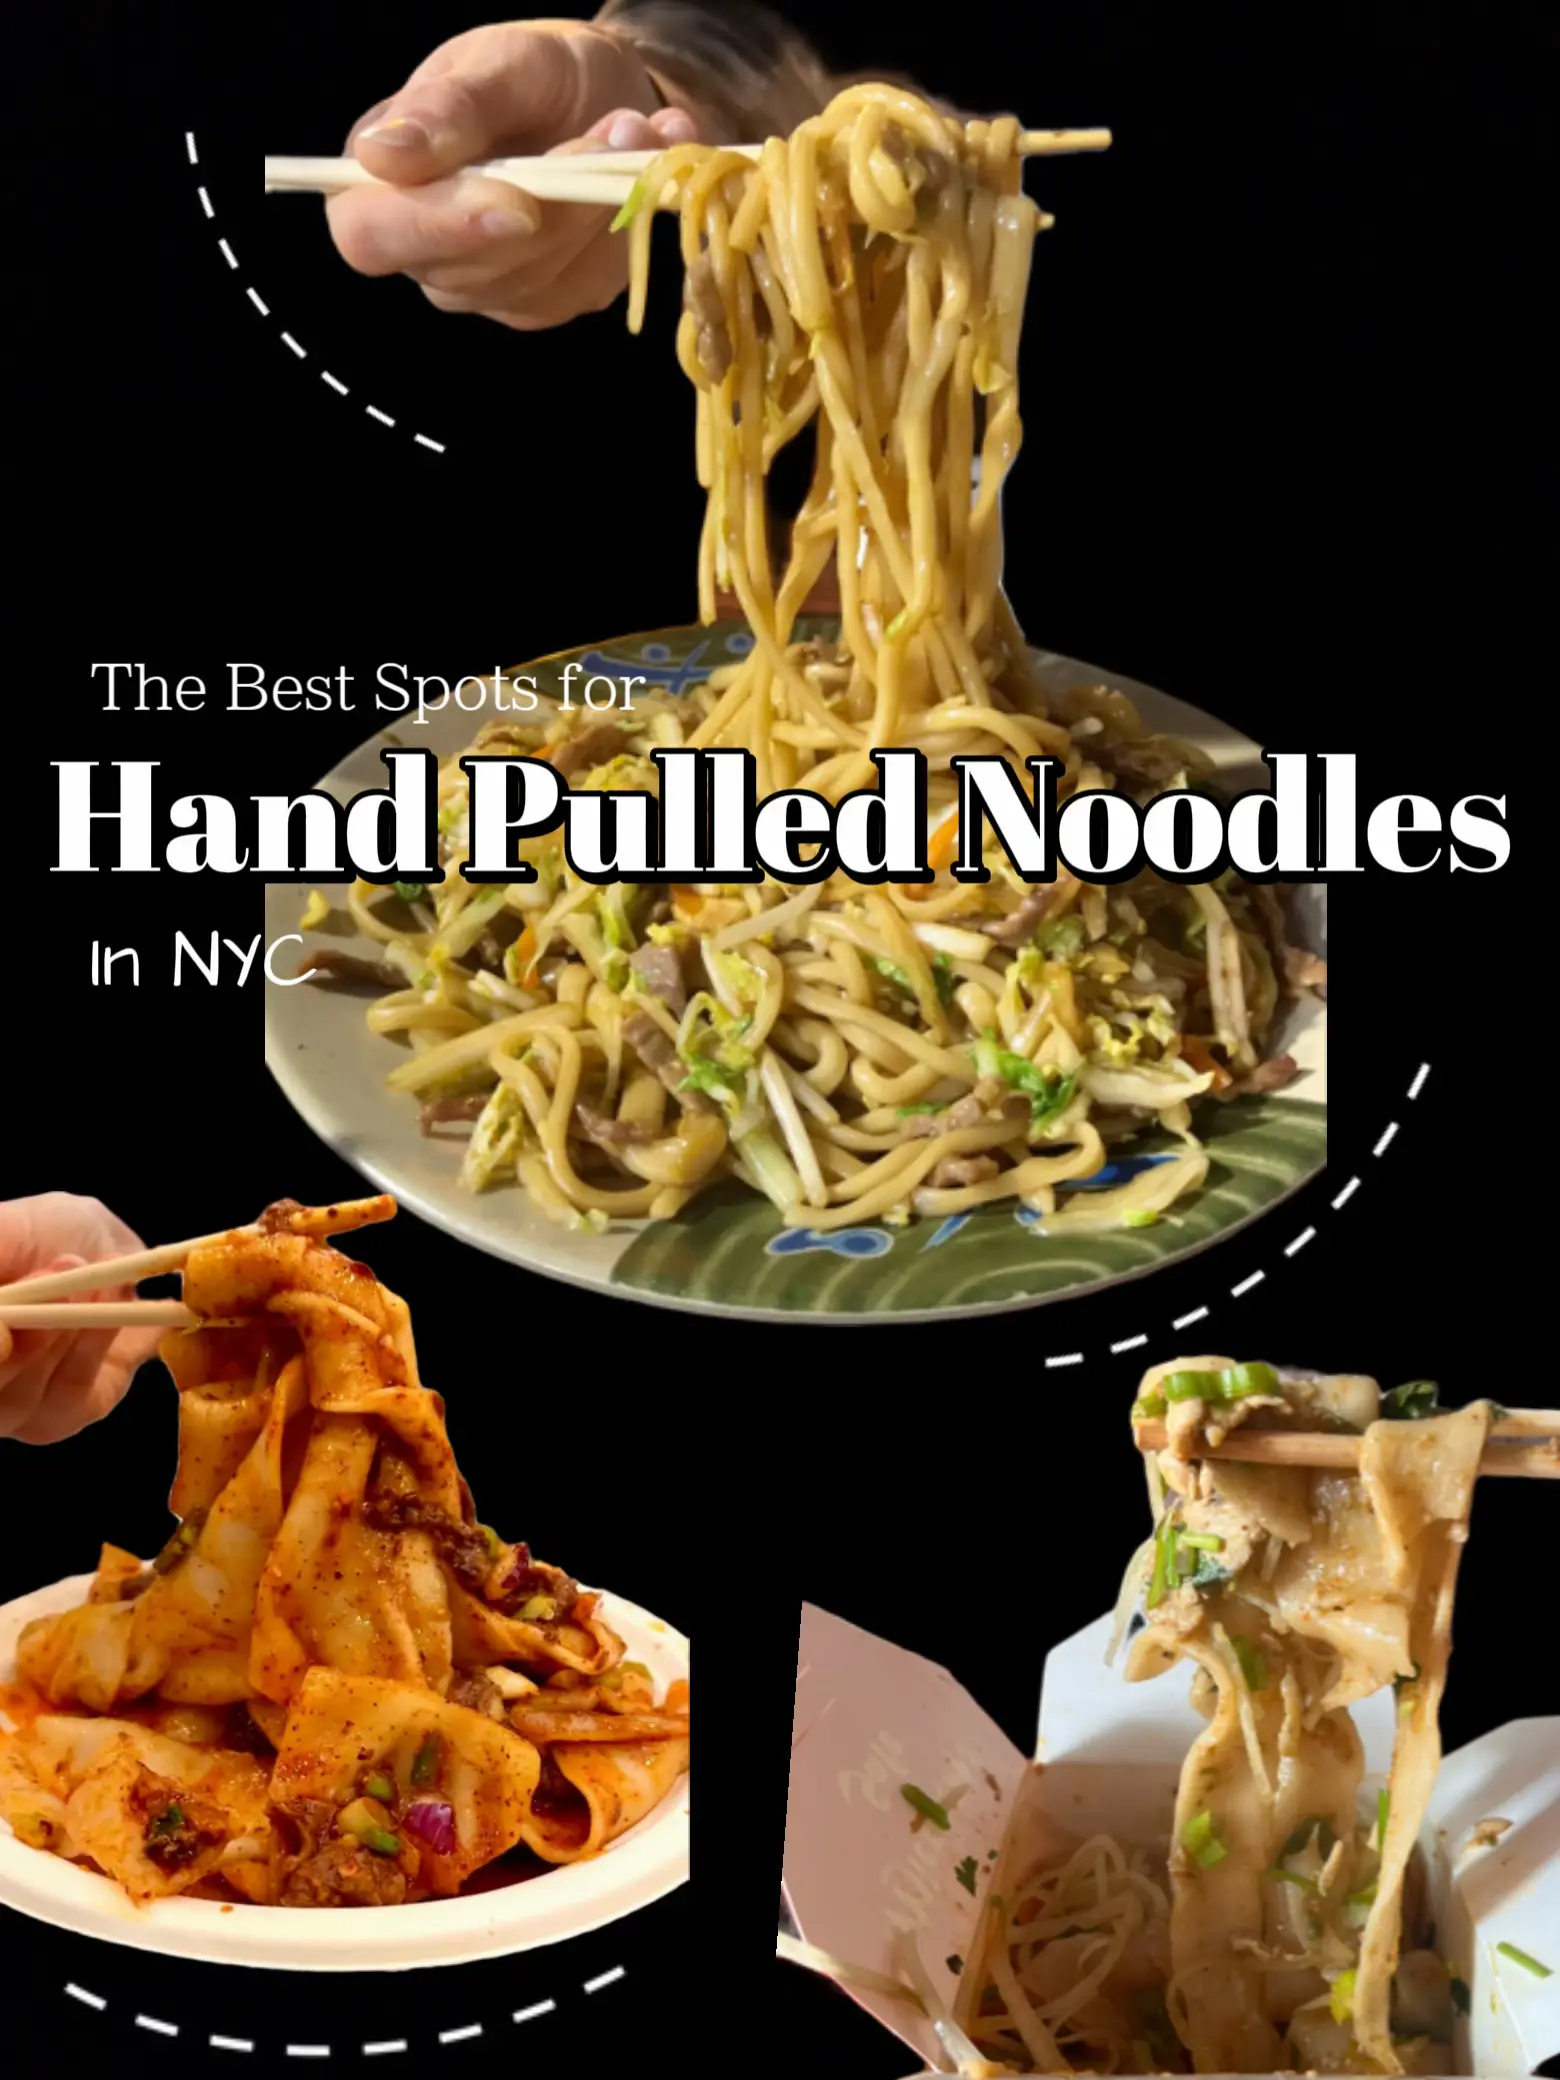 Chinese Noodle House with Hand-Pulled Noodles in Kl - Lemon8 Search